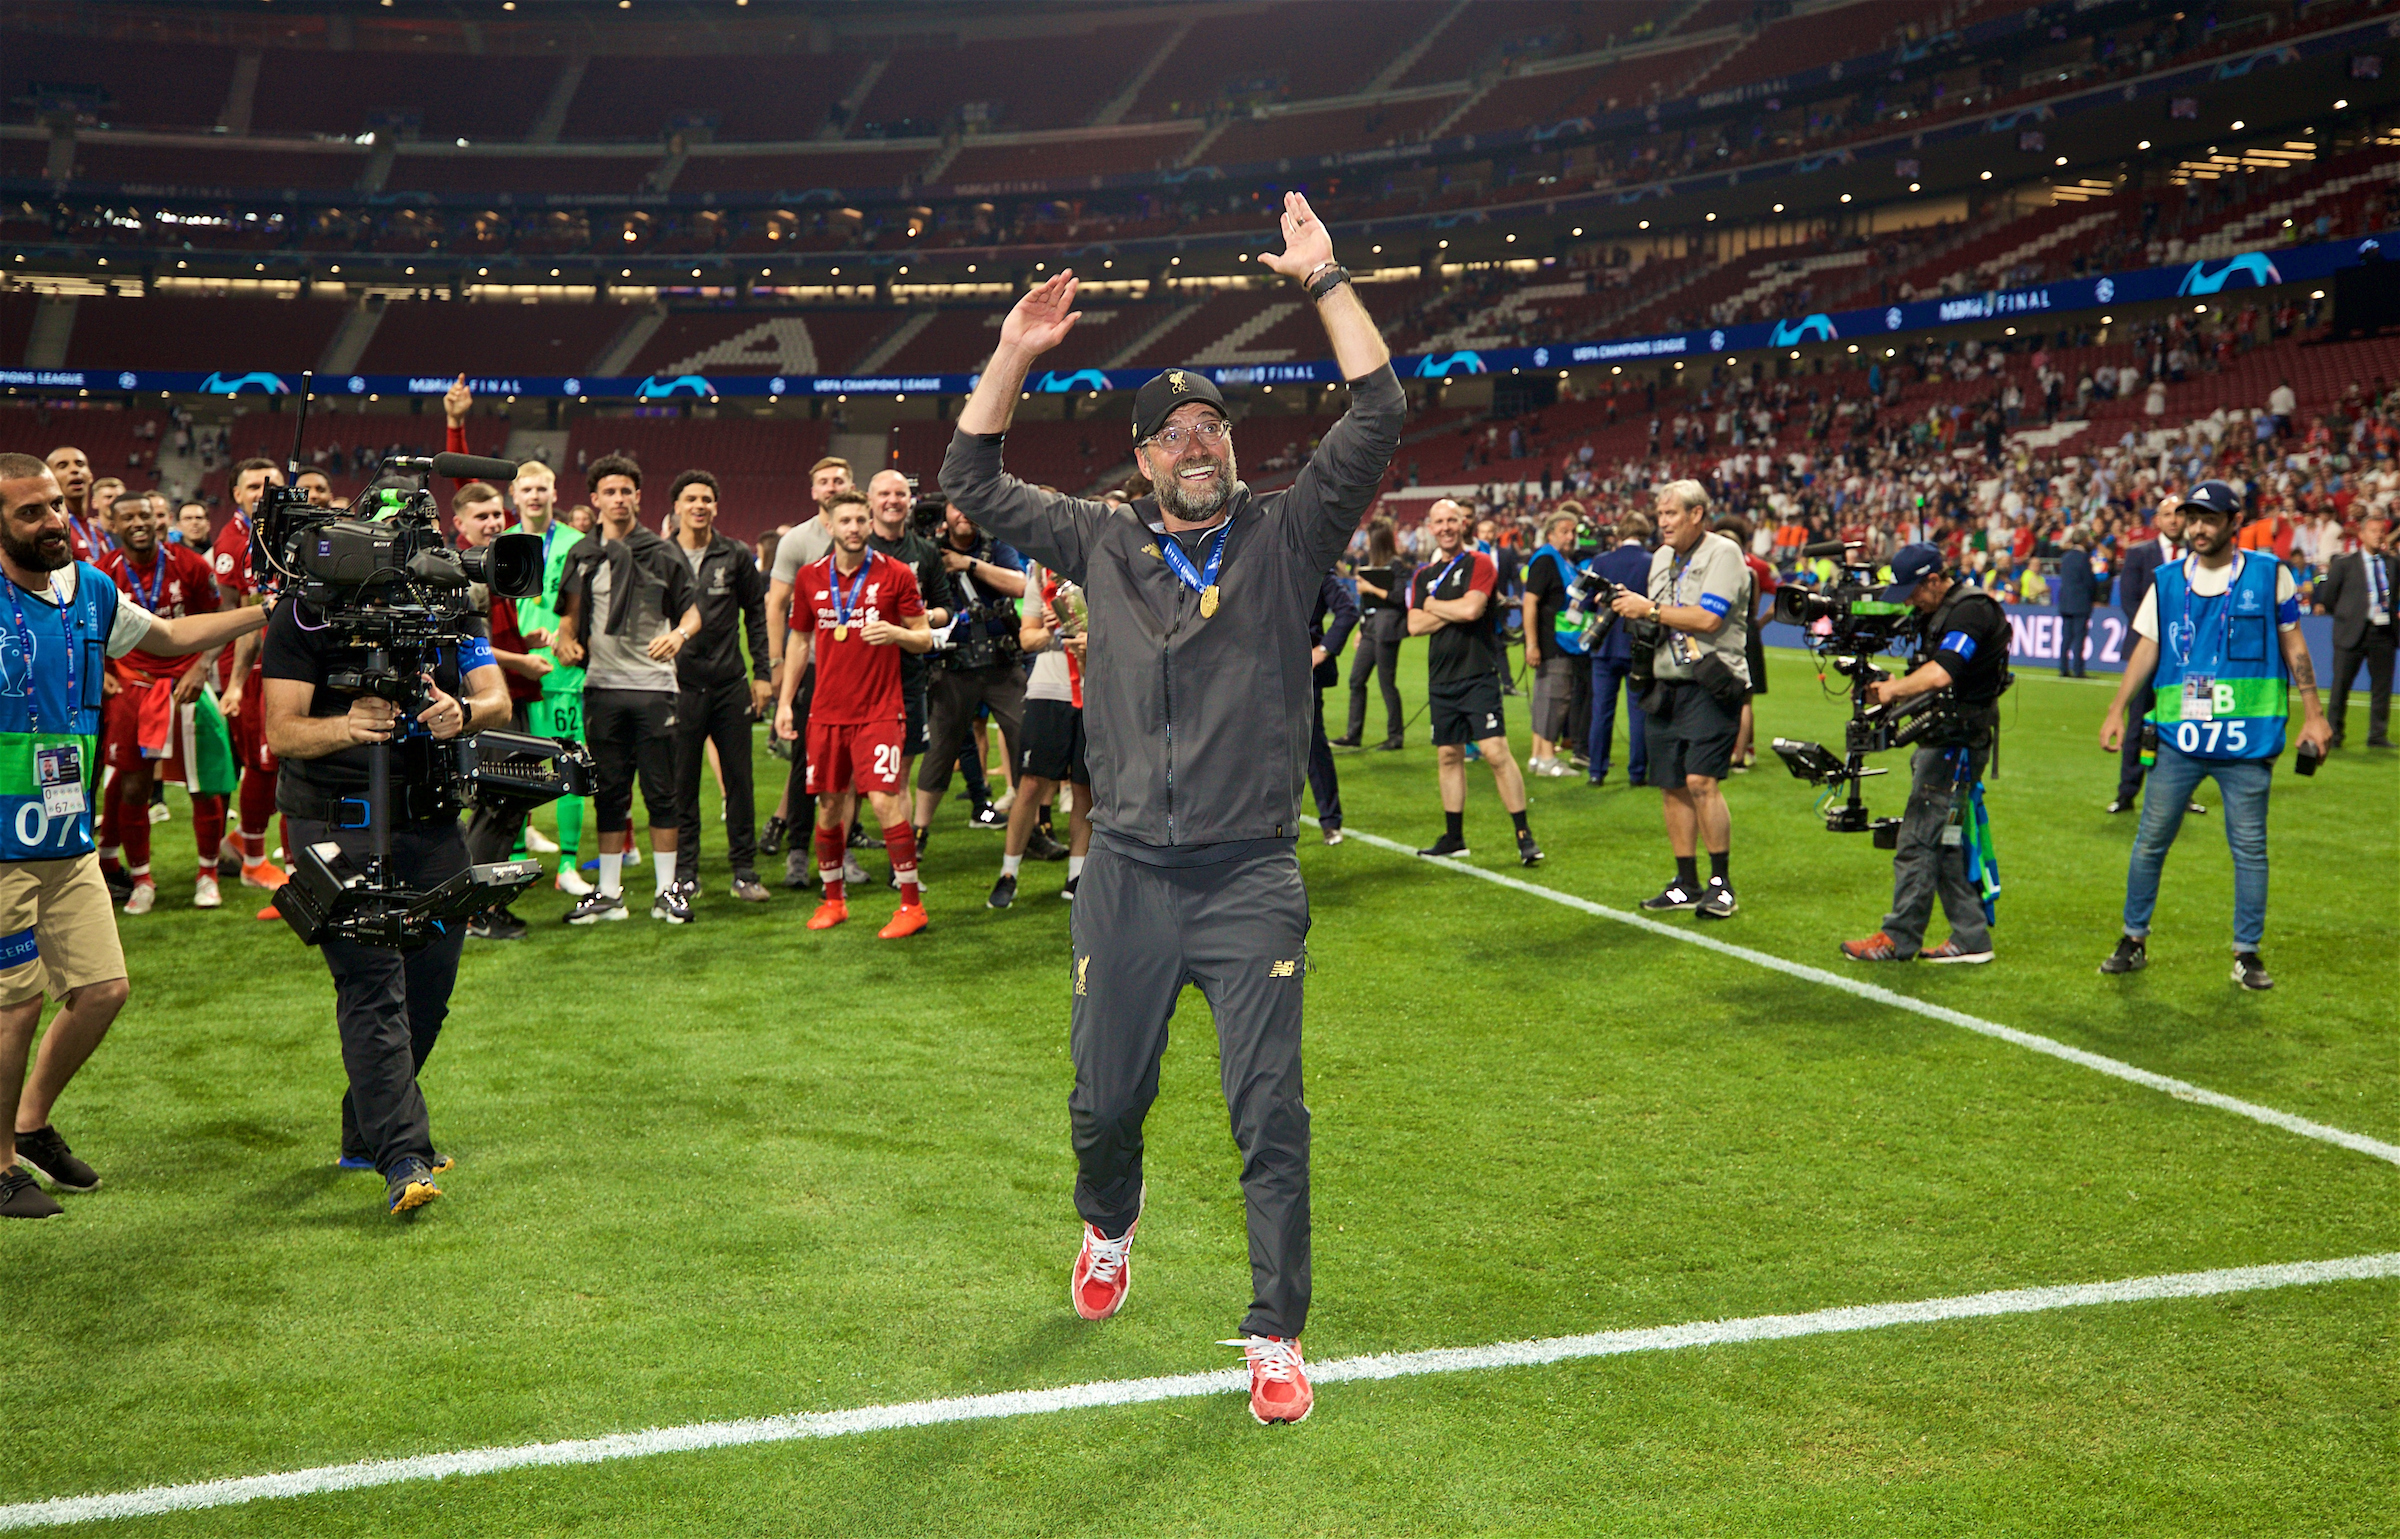 MADRID, SPAIN - SATURDAY, JUNE 1, 2019: Liverpool's manager Jürgen Klopp celebrates with his team after the UEFA Champions League Final match between Tottenham Hotspur FC and Liverpool FC at the Estadio Metropolitano. Liverpool won 2-0 to win their sixth European Cup. (Pic by David Rawcliffe/Propaganda)